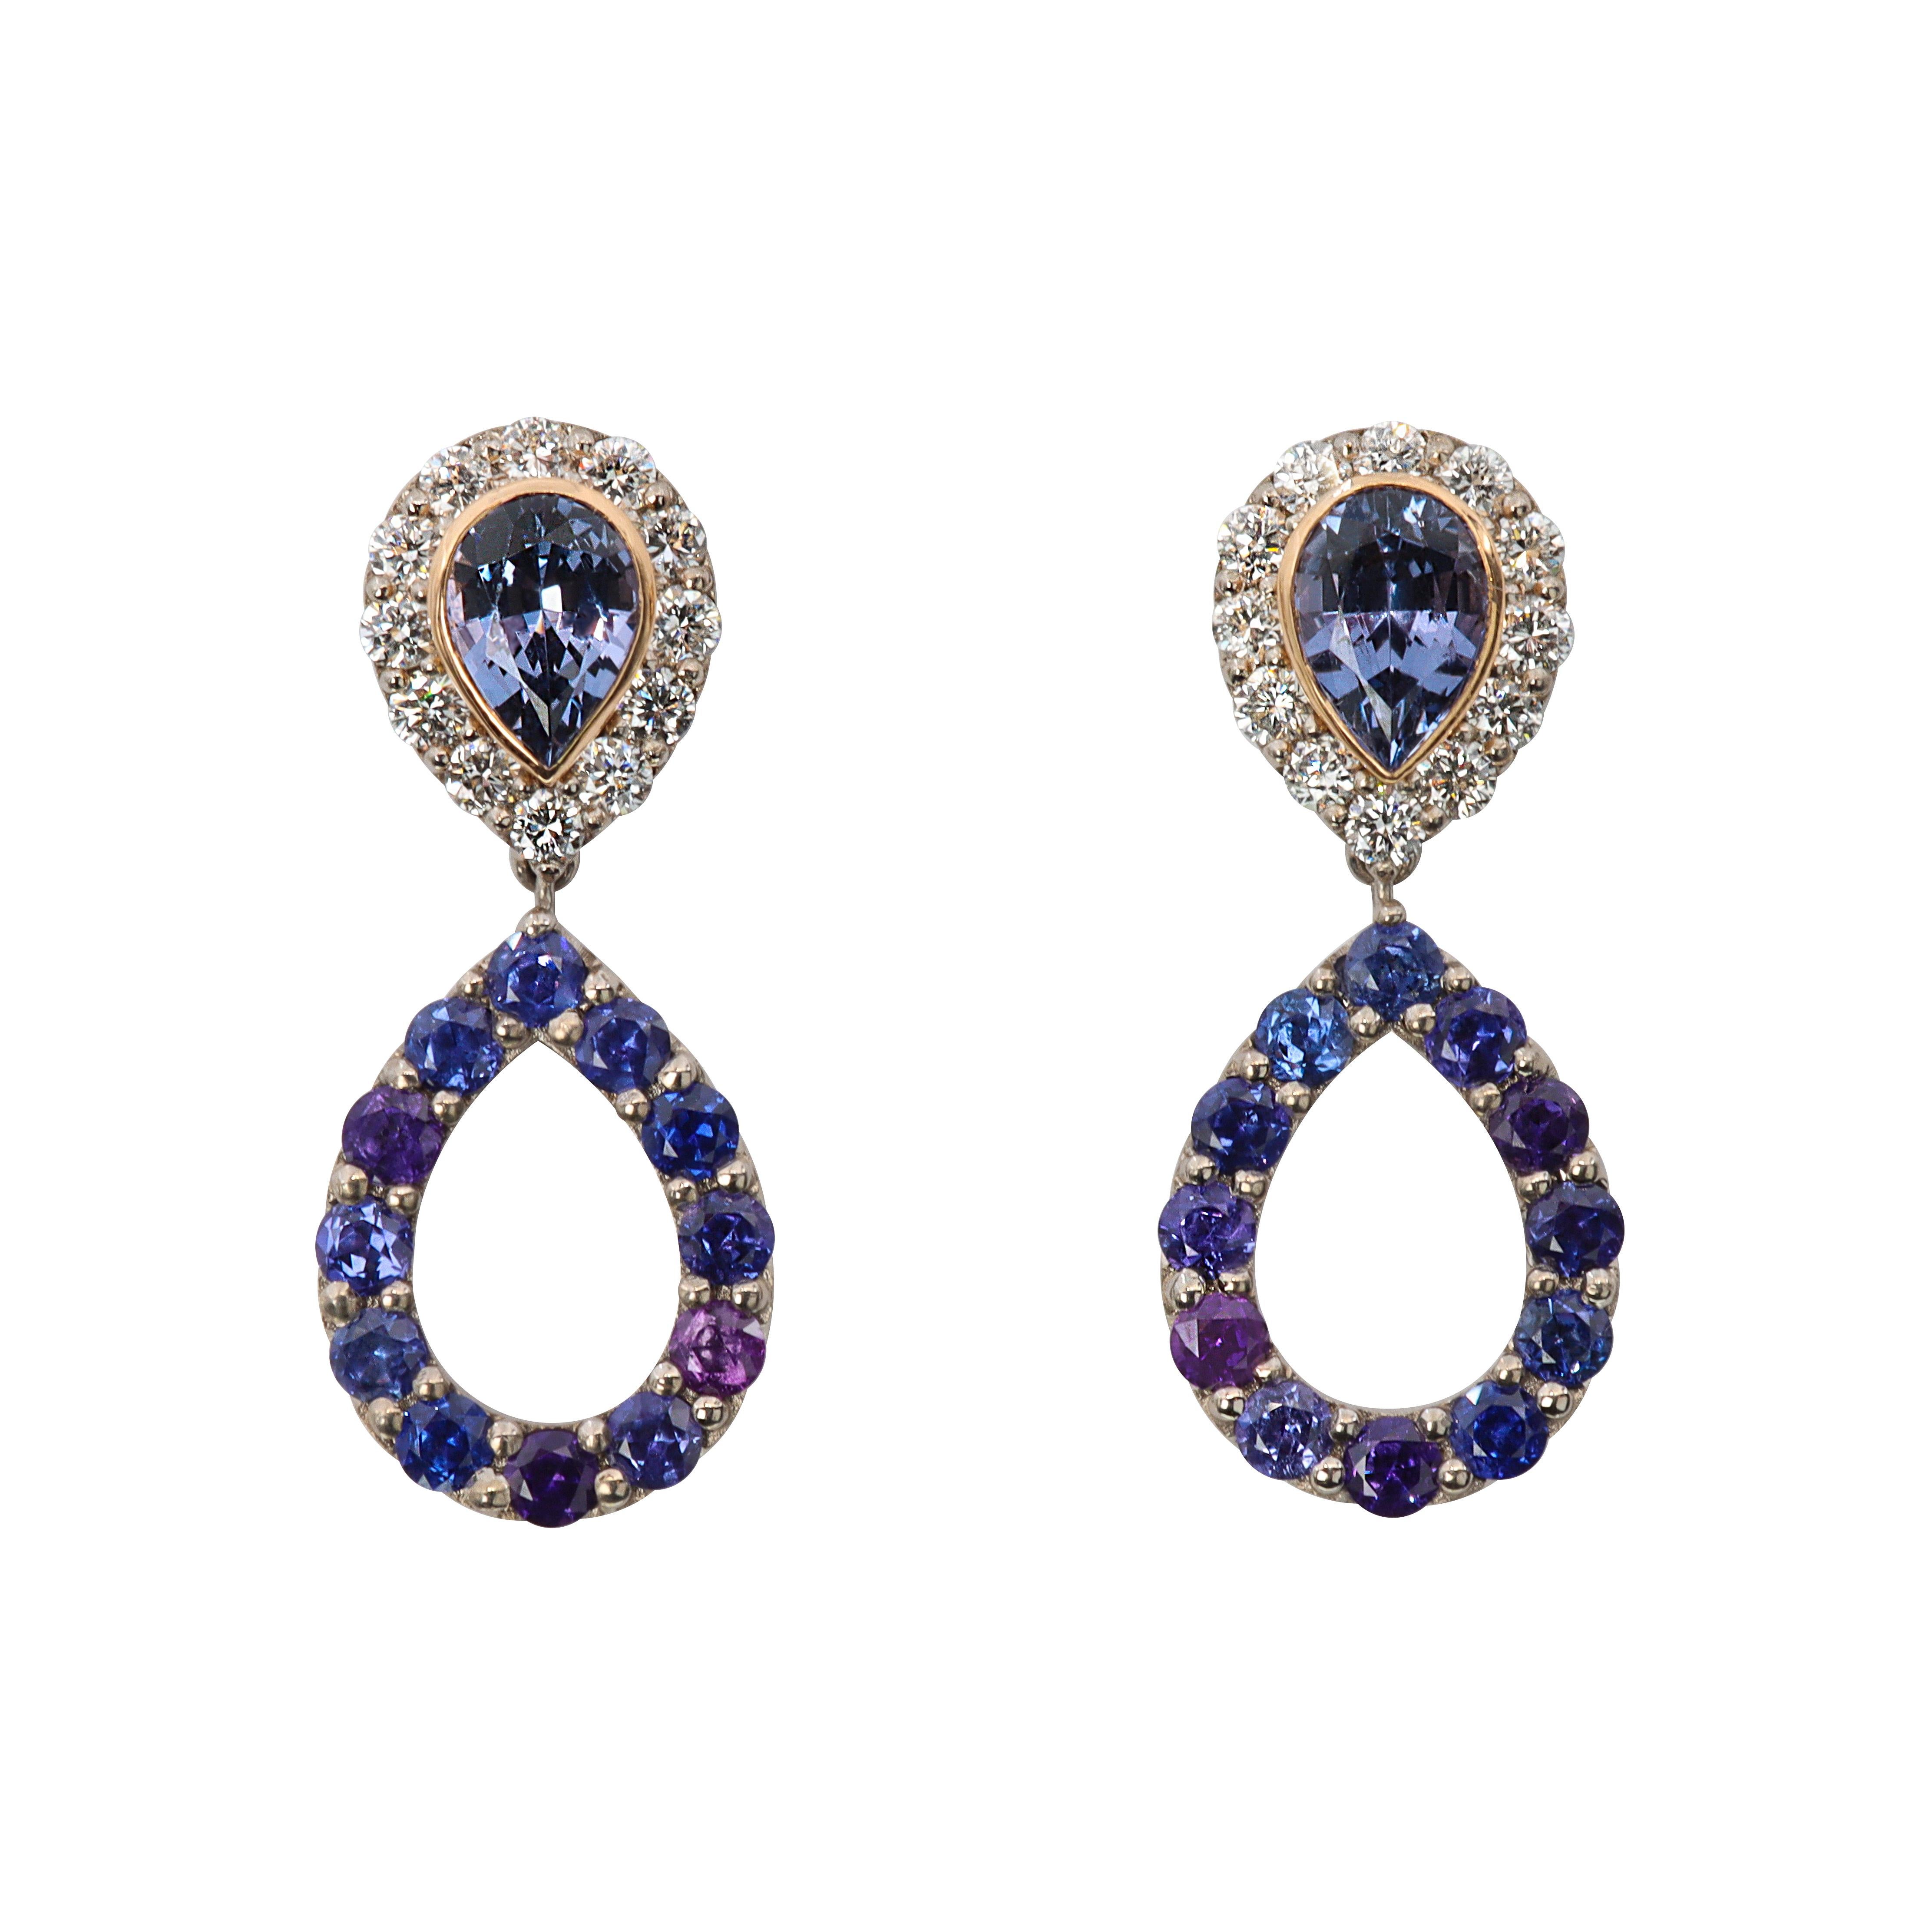 Aventina-Spencer, Natural Colour Change Sapphire, Diamond and Spinel Earrings For Sale